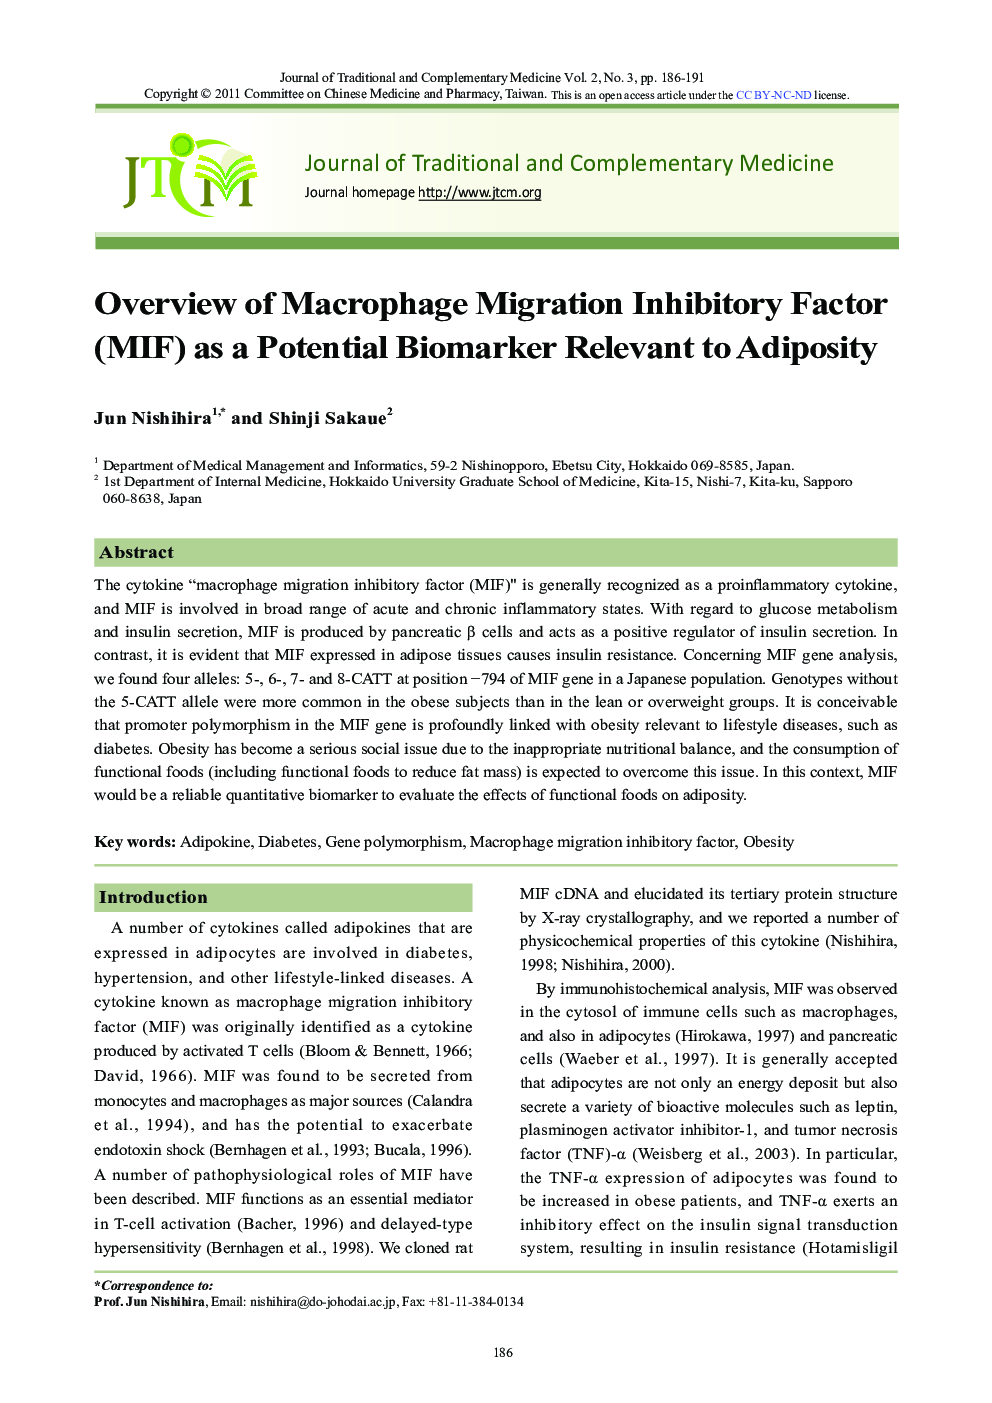 Overview of Macrophage Migration Inhibitory Factor (MIF) as a Potential Biomarker Relevant to Adiposity